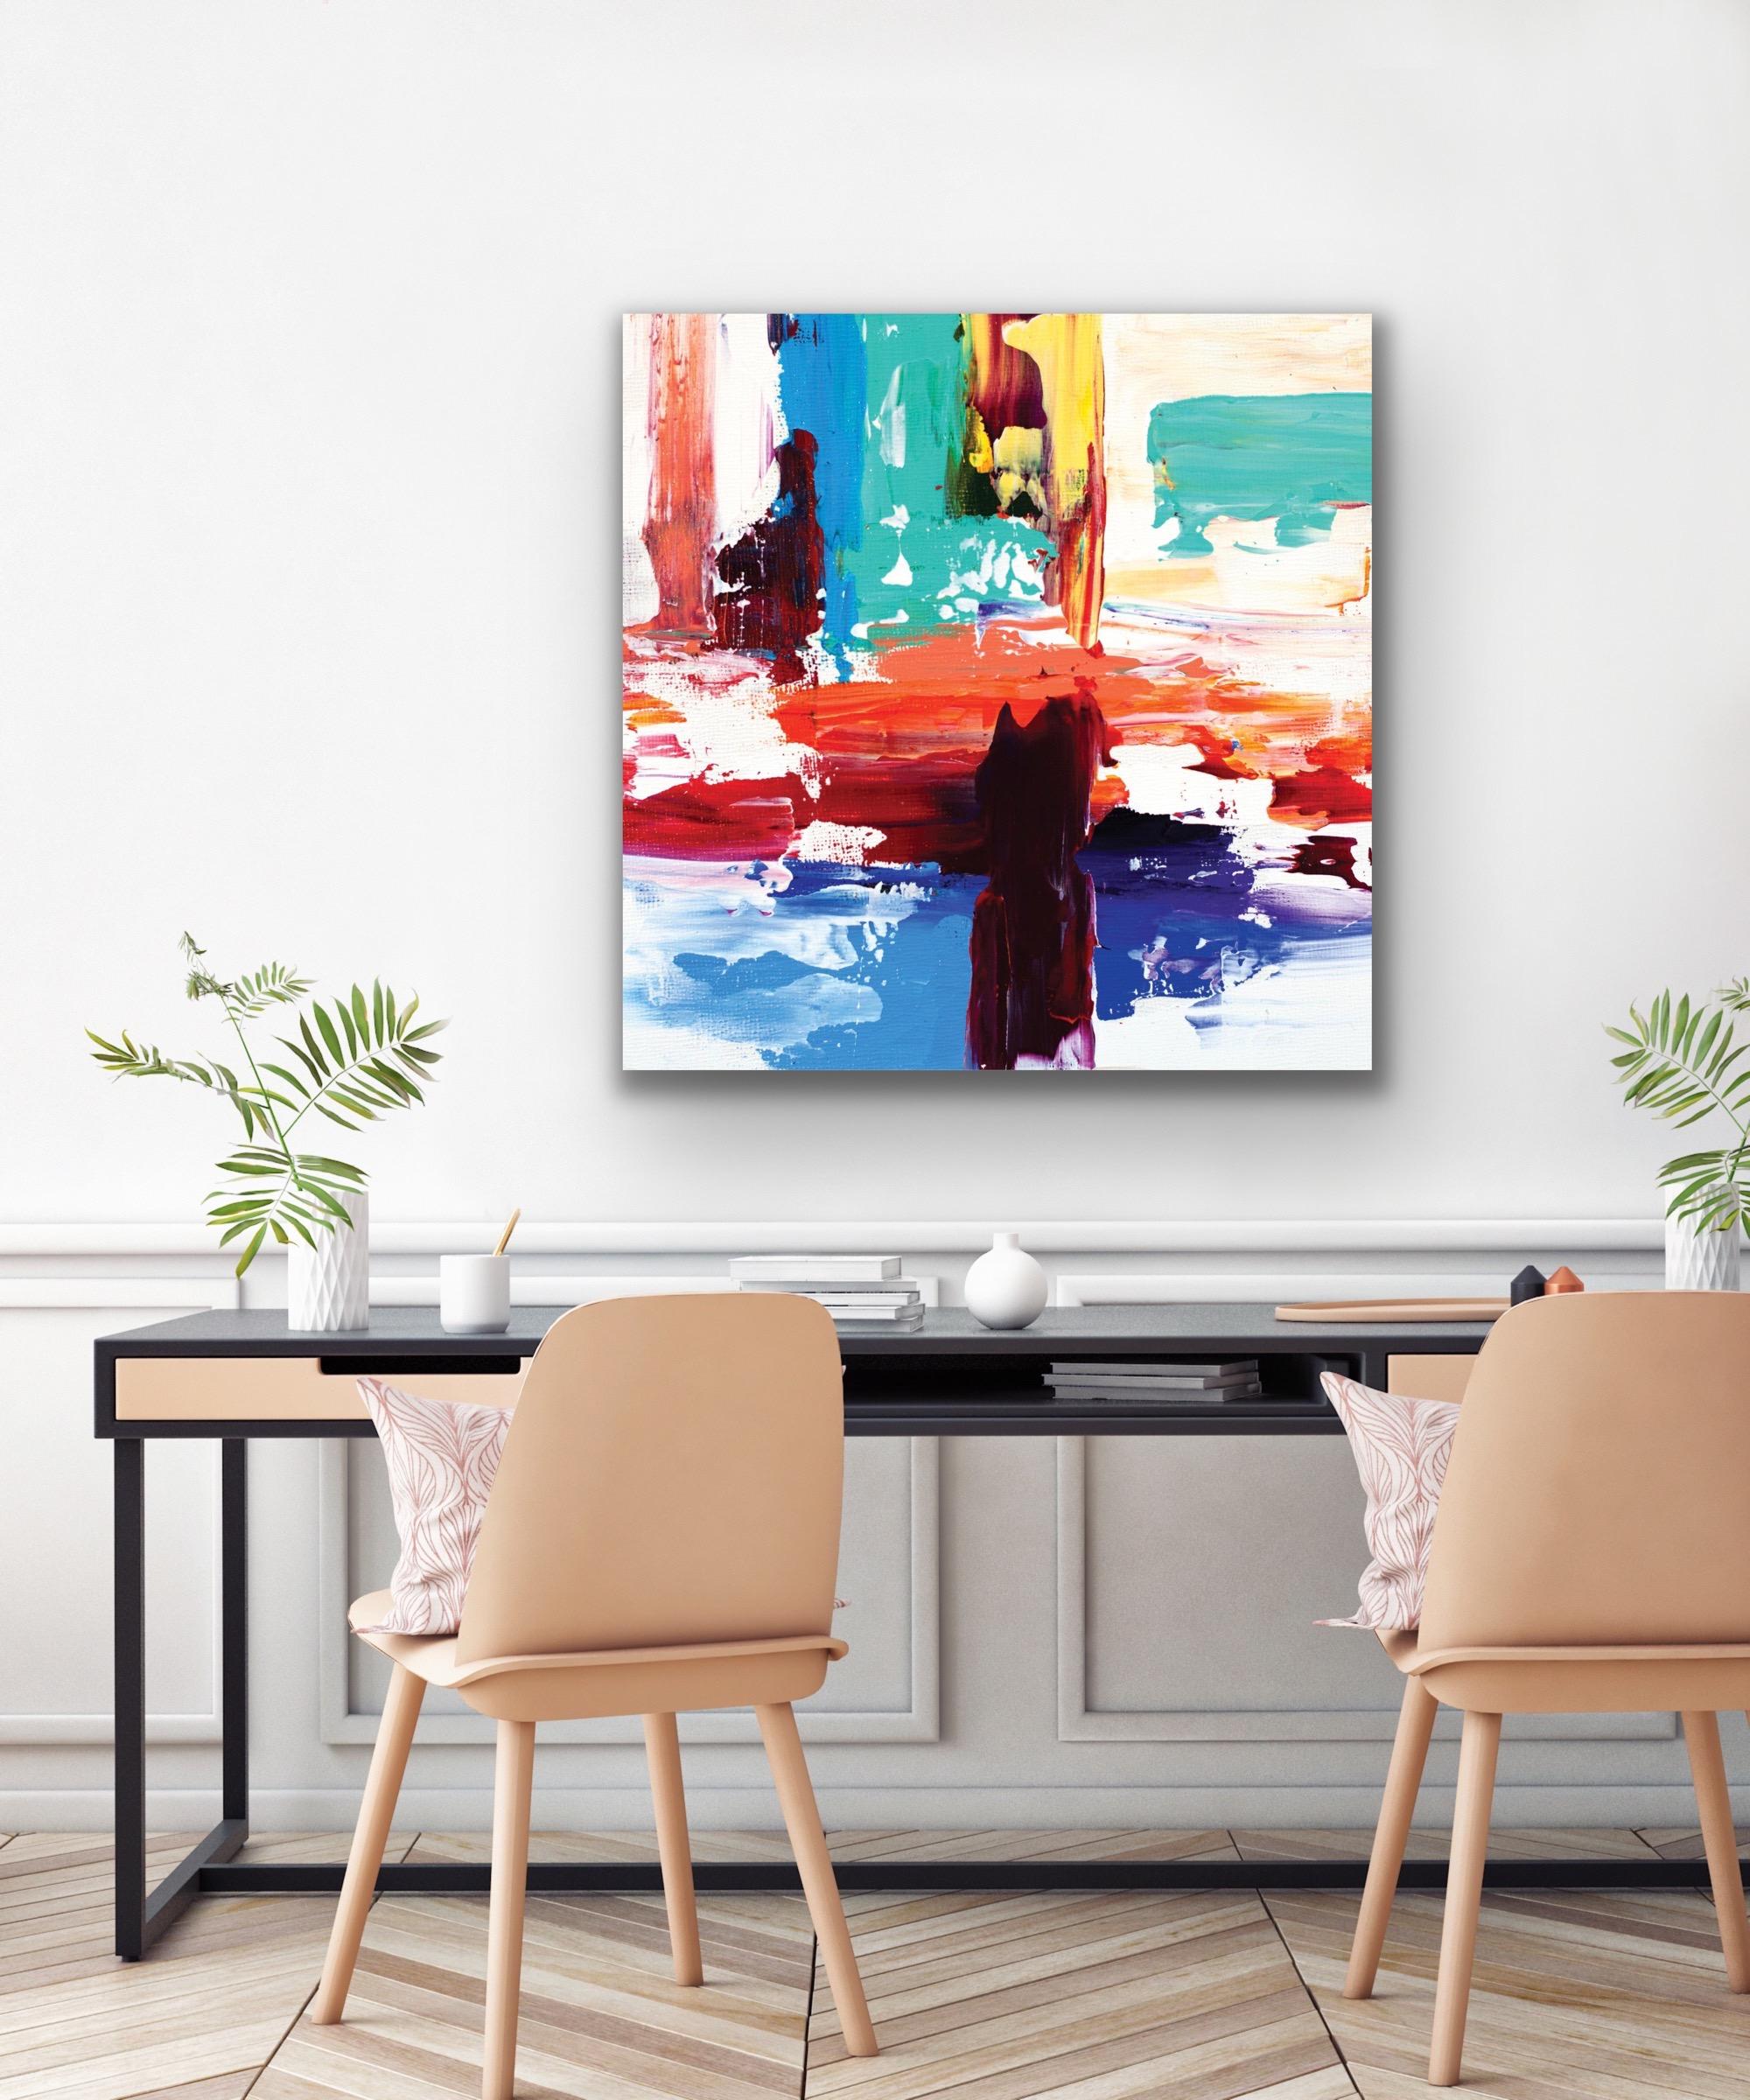 Contemporary Painting, Modern Decor, Large Indoor Outdoor Giclee Print on Metal 1